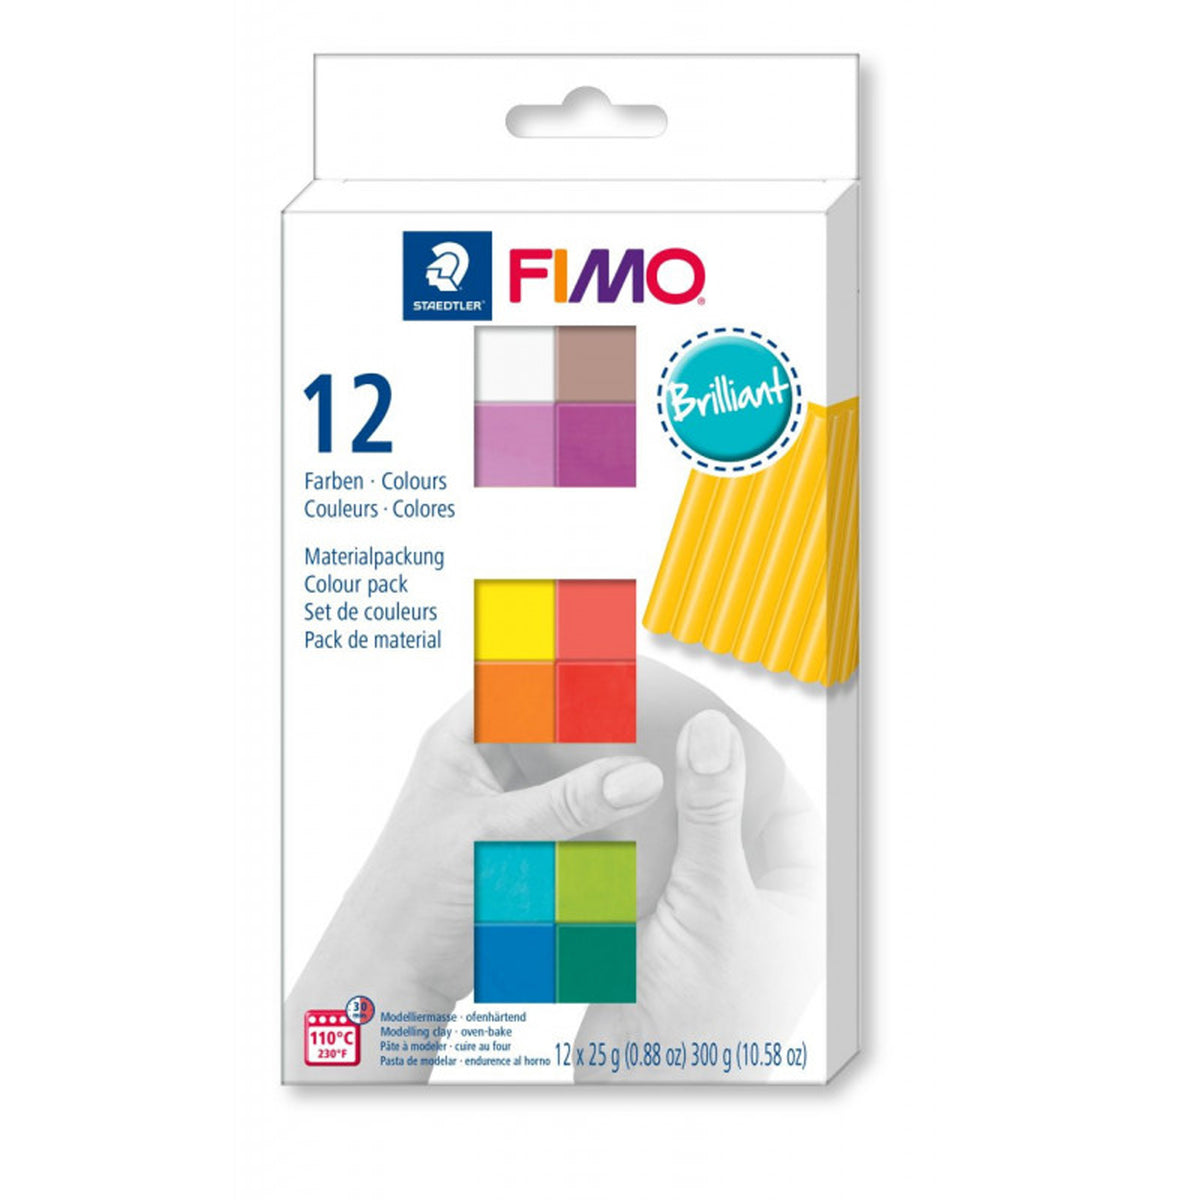 FIMO Soft Material Pack with 12 Half Blocks - Brilliant - Box